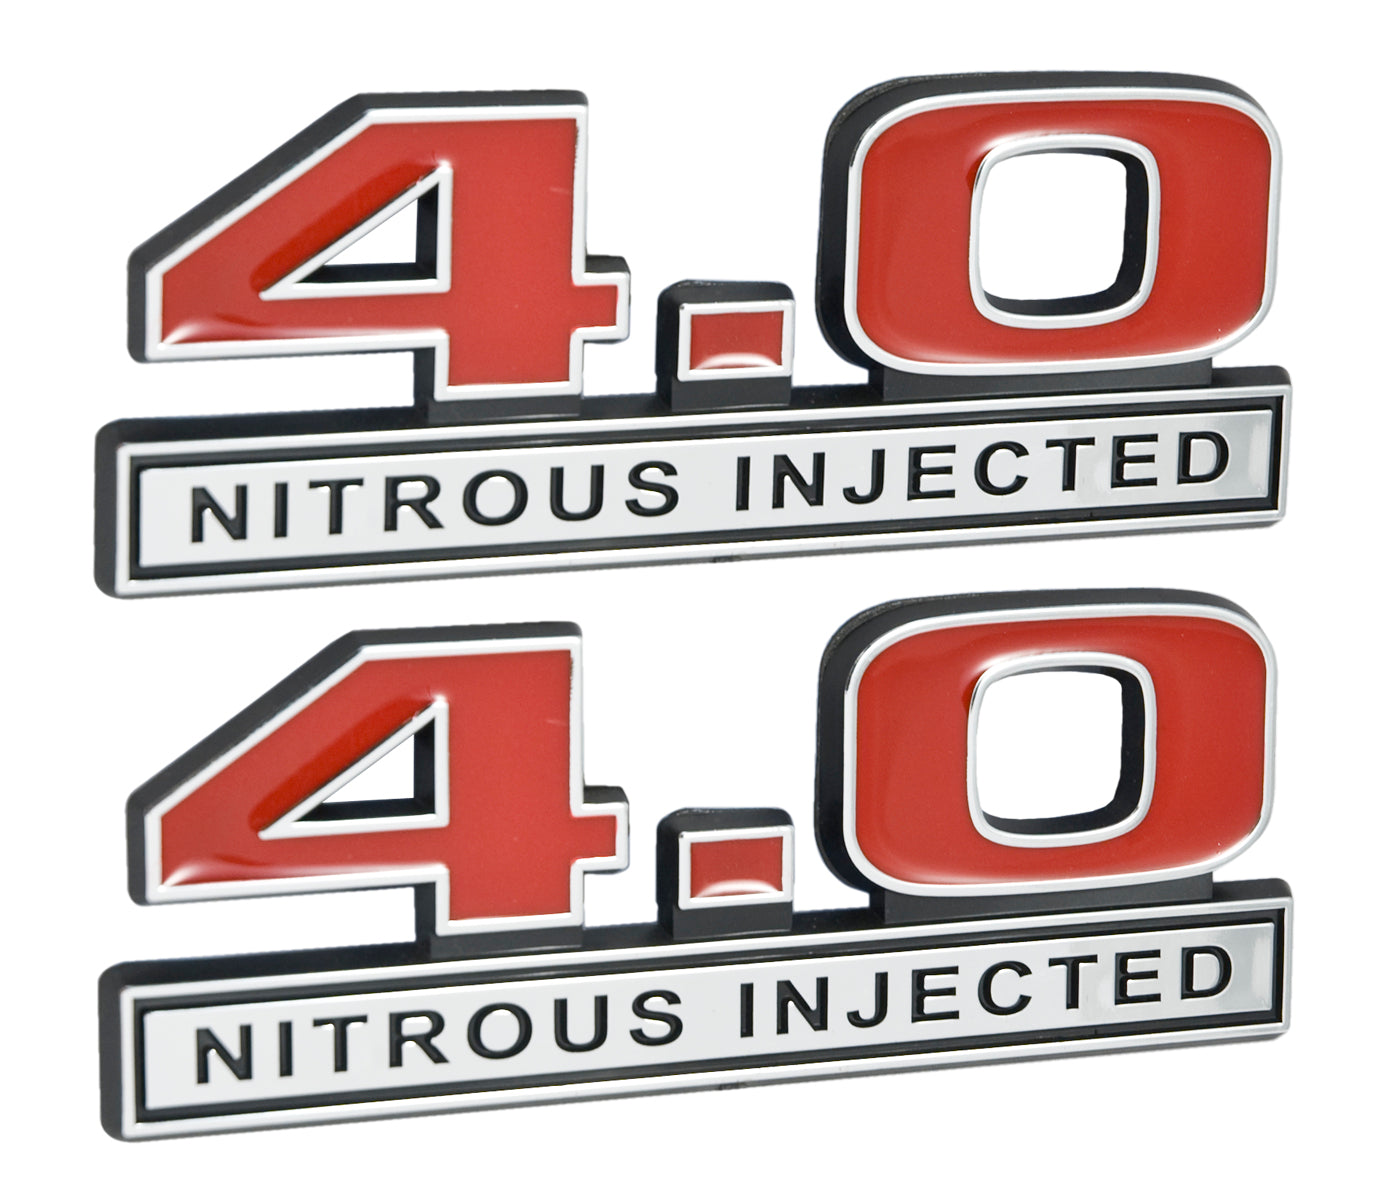 4.0 Nitrous Injected NOS Engine Emblems Badges in Chrome & Red - 5" Long Pair